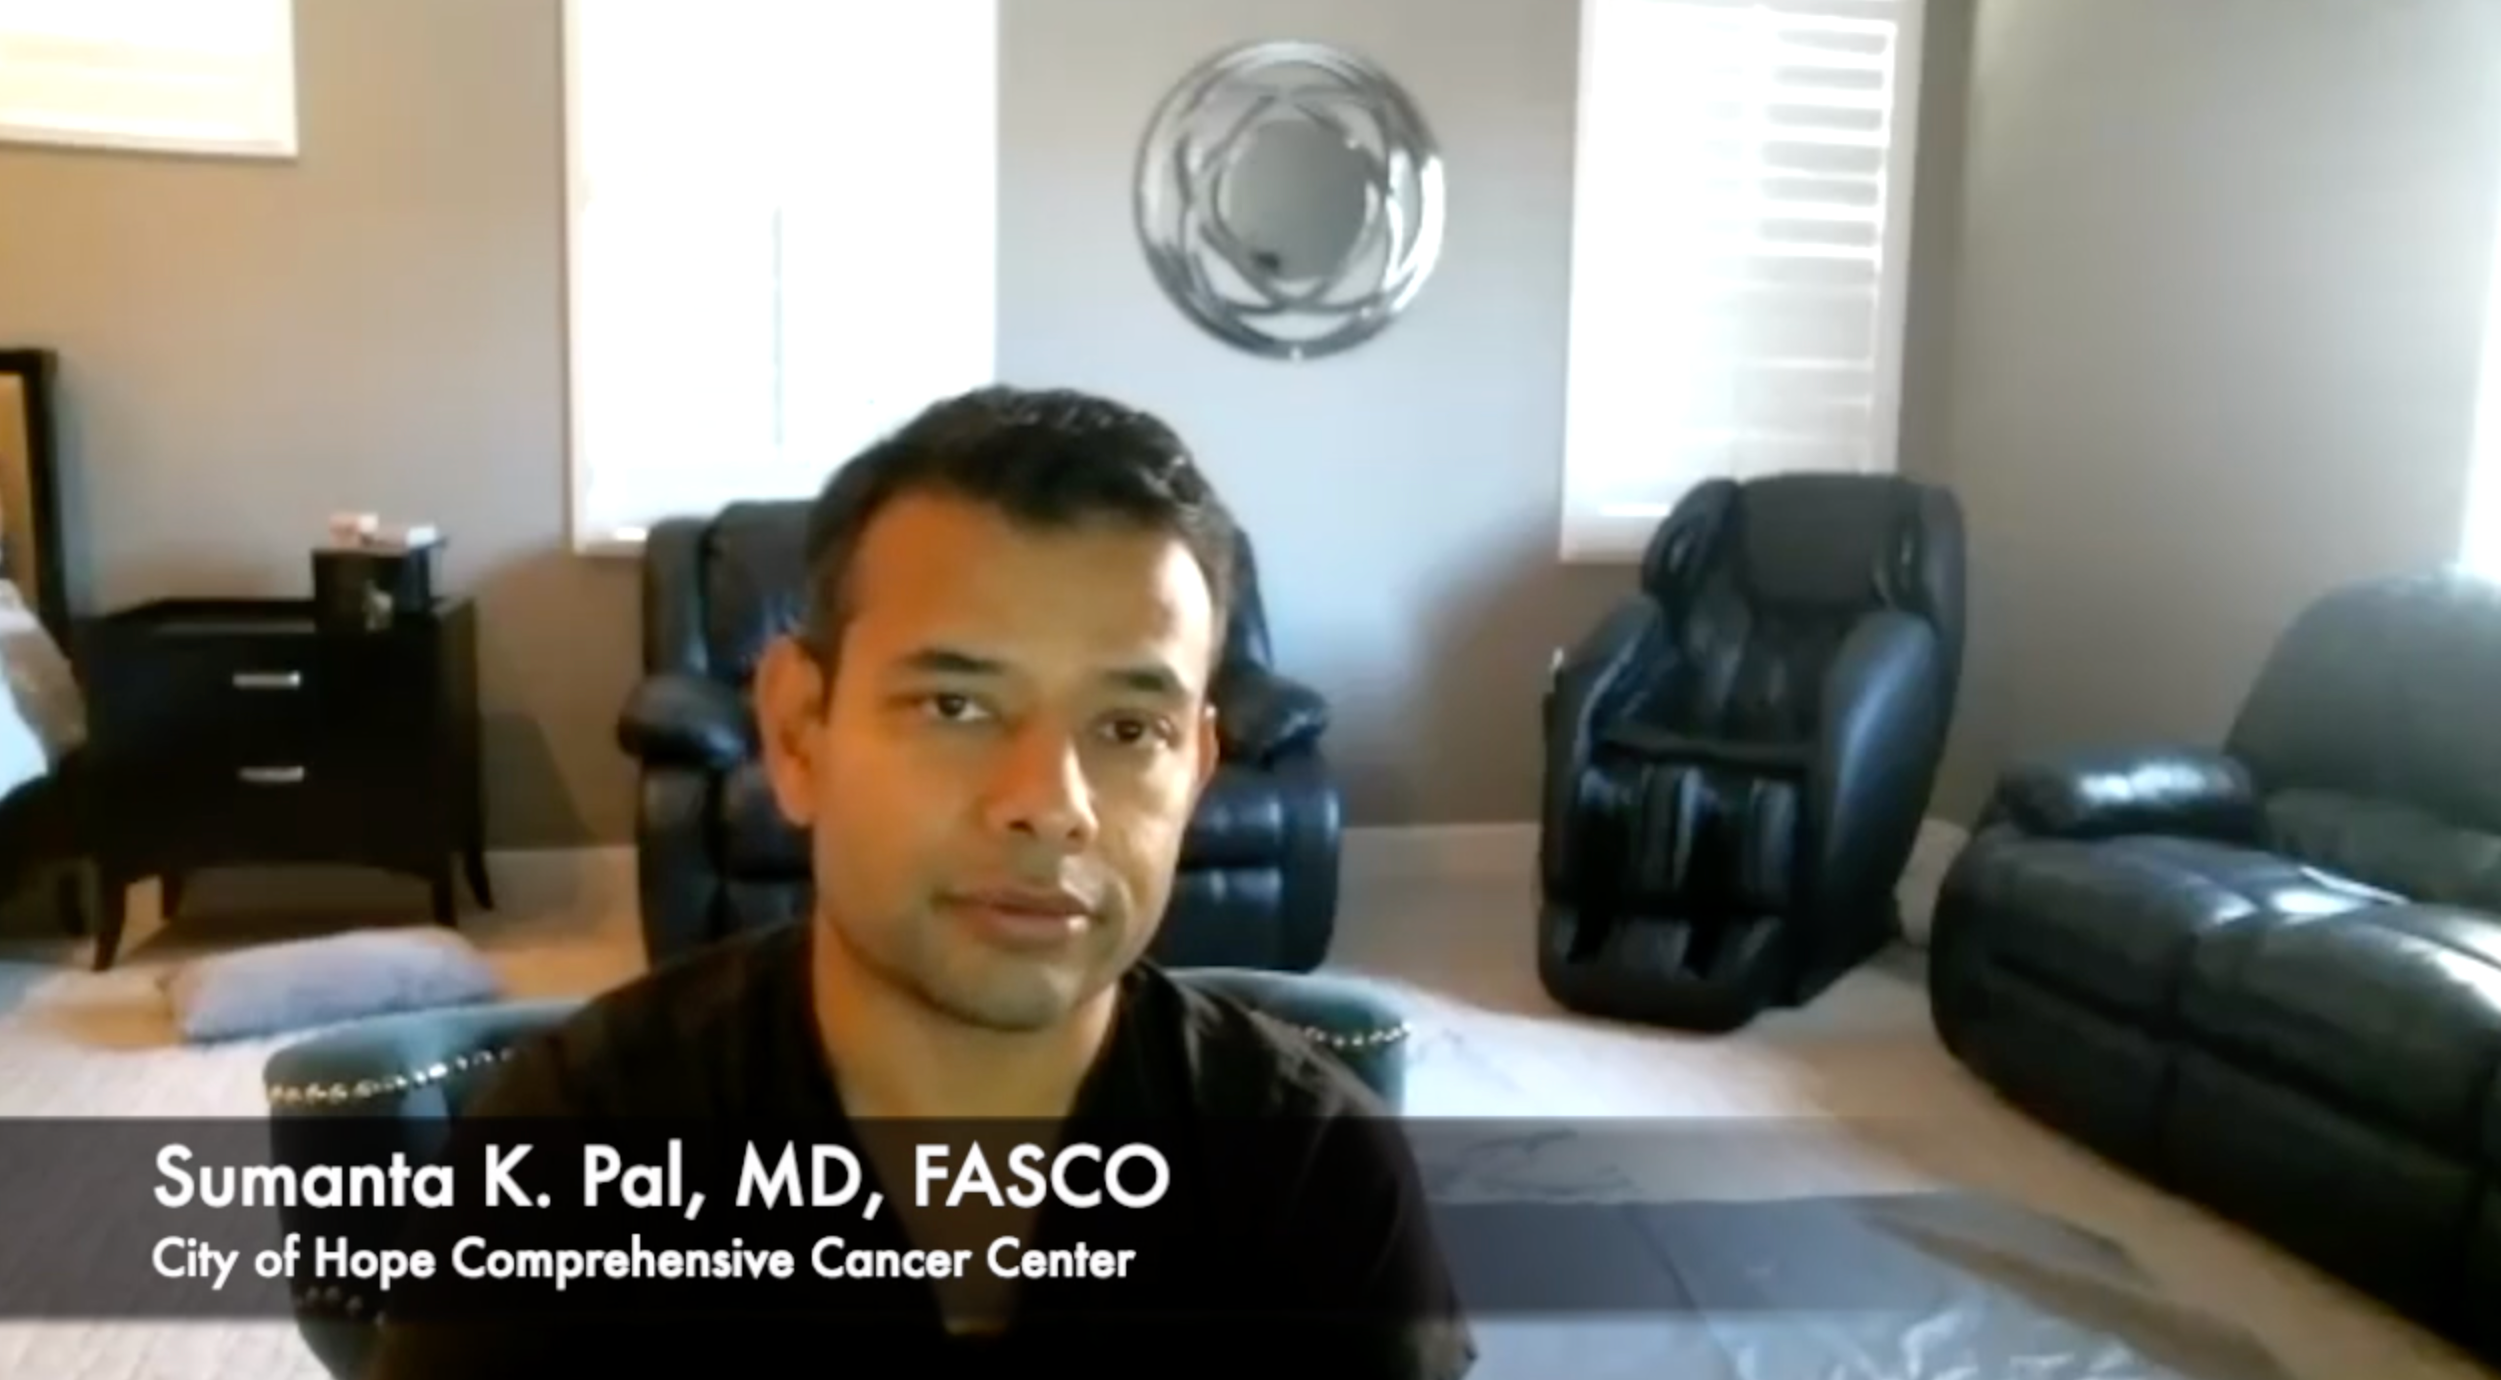 Sumanta K. Pal, MD, FASCO, on Tolerability of Lenvatinib and Everolimus to Treat Patients With RCC